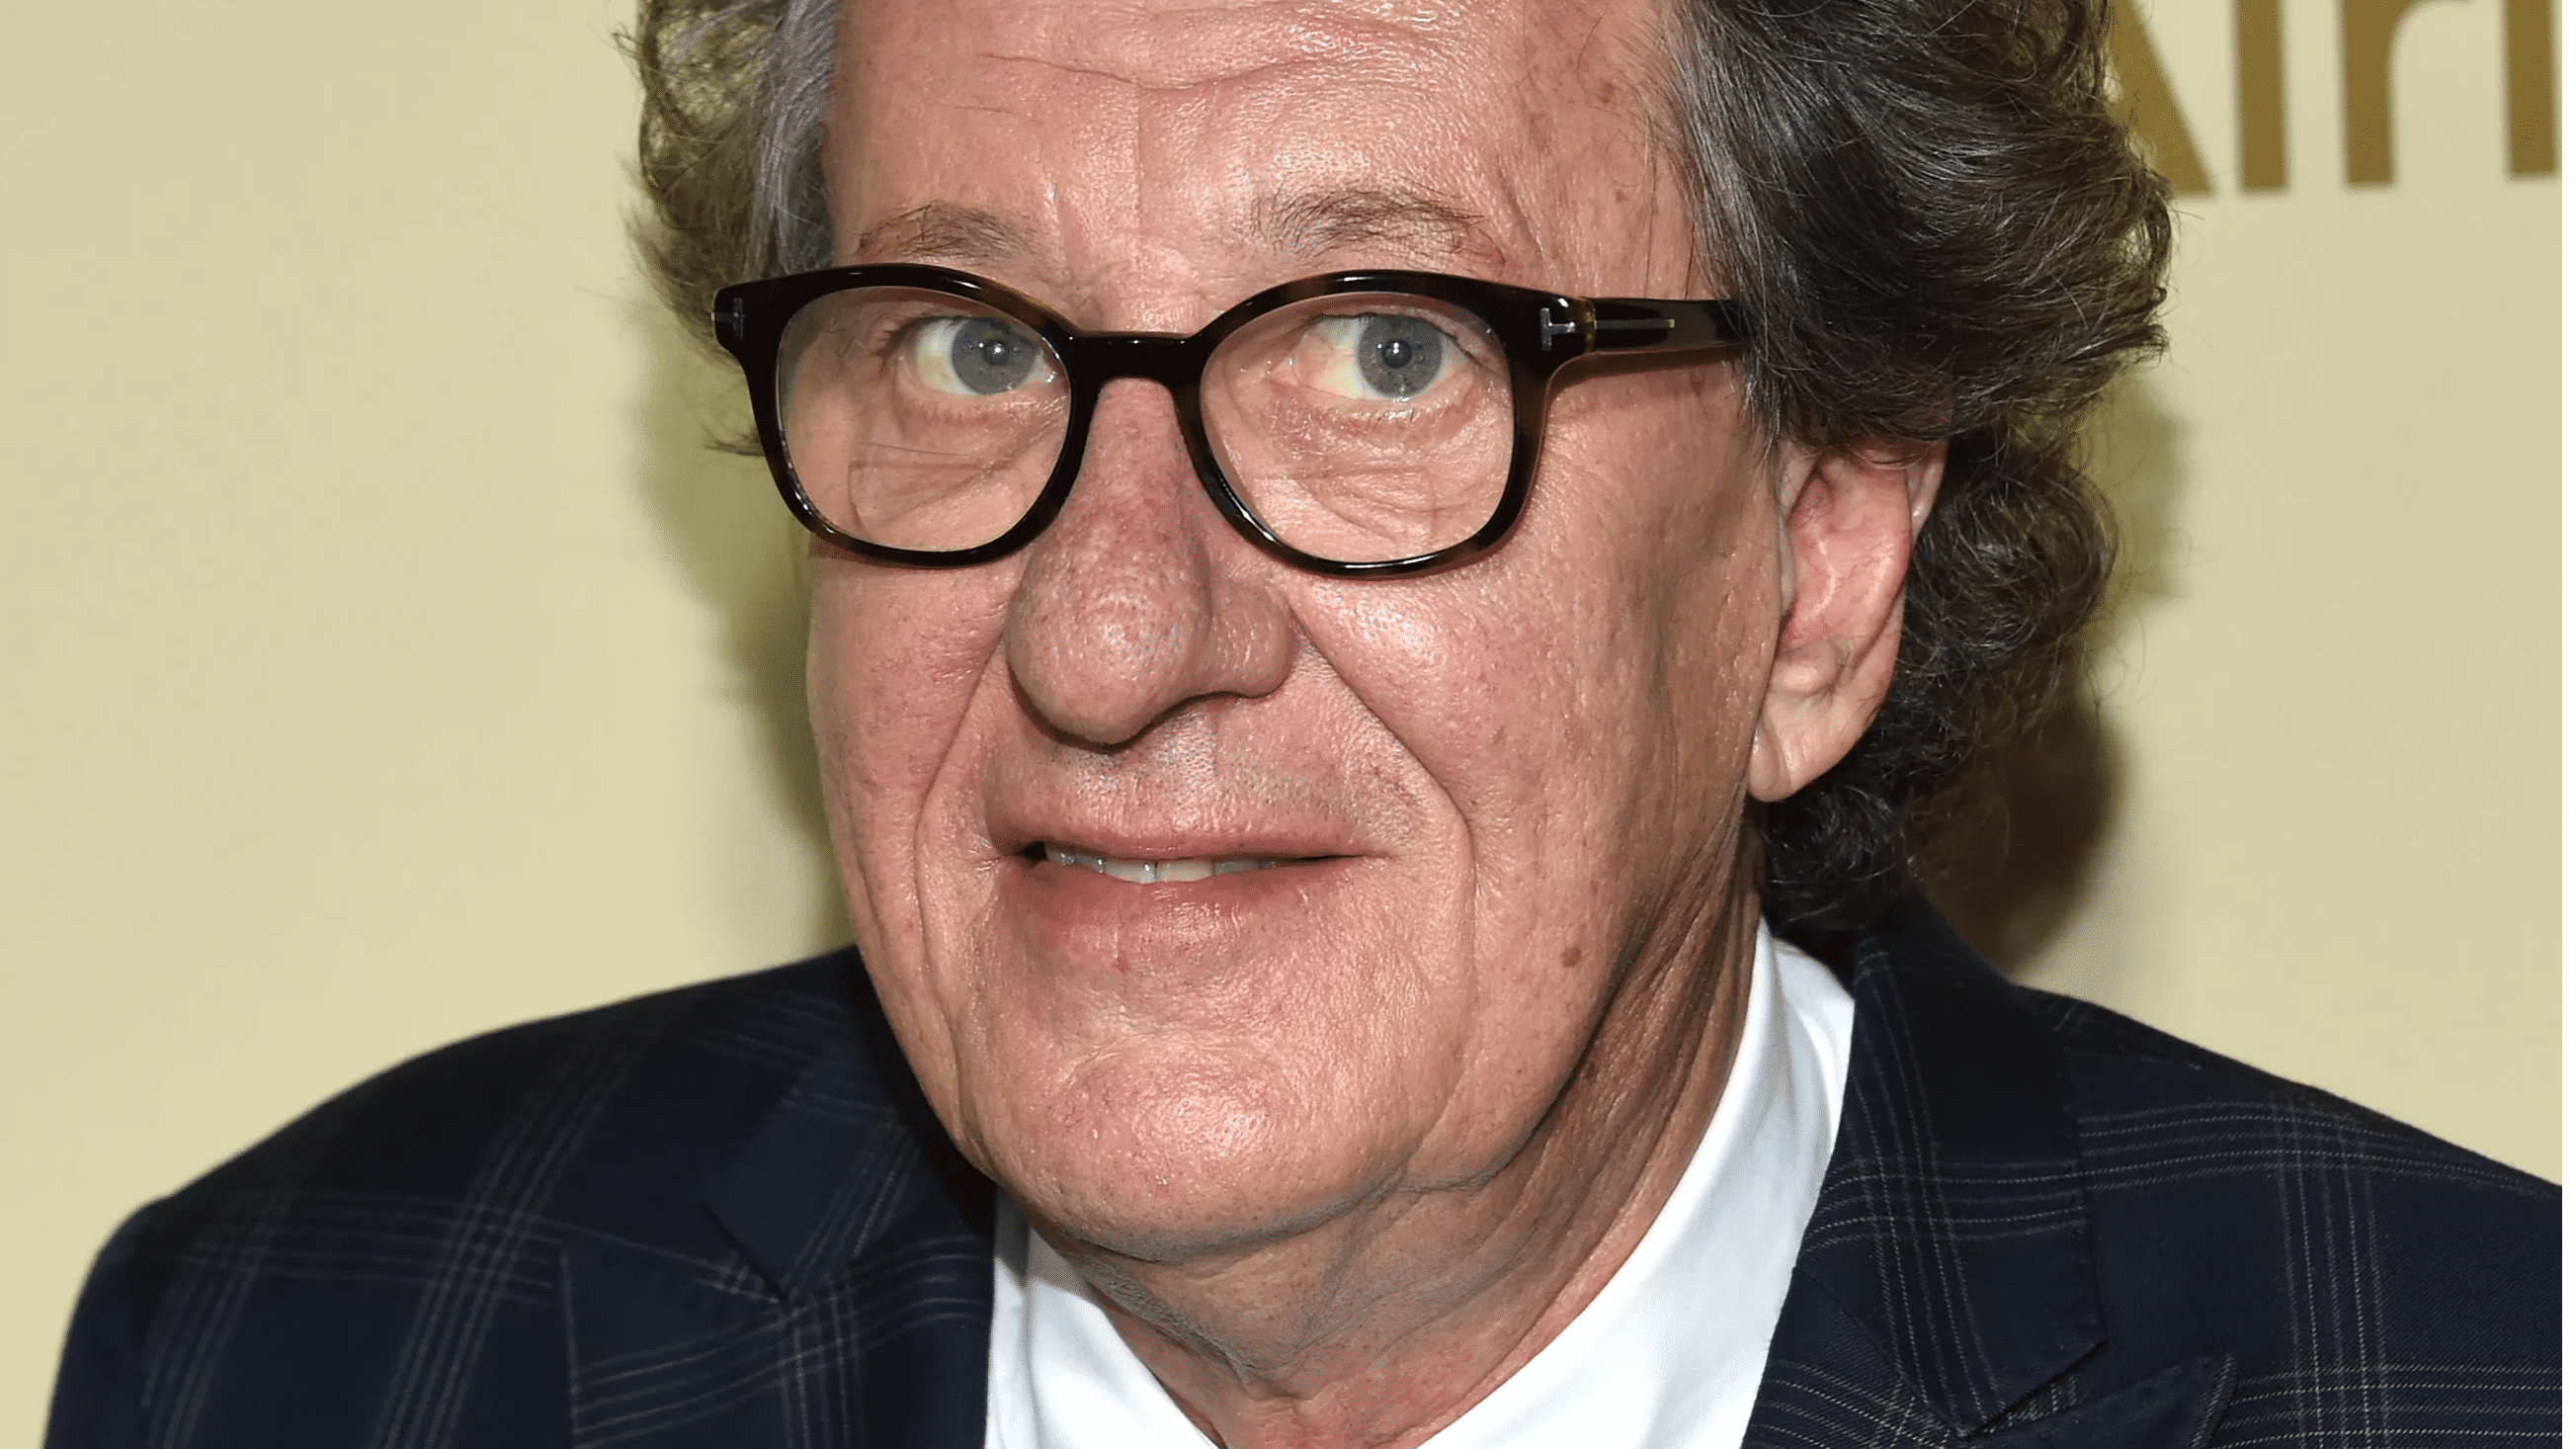 Actor Geoffrey Rush wins $2 million defamation payout, largest ever in Australia’s history